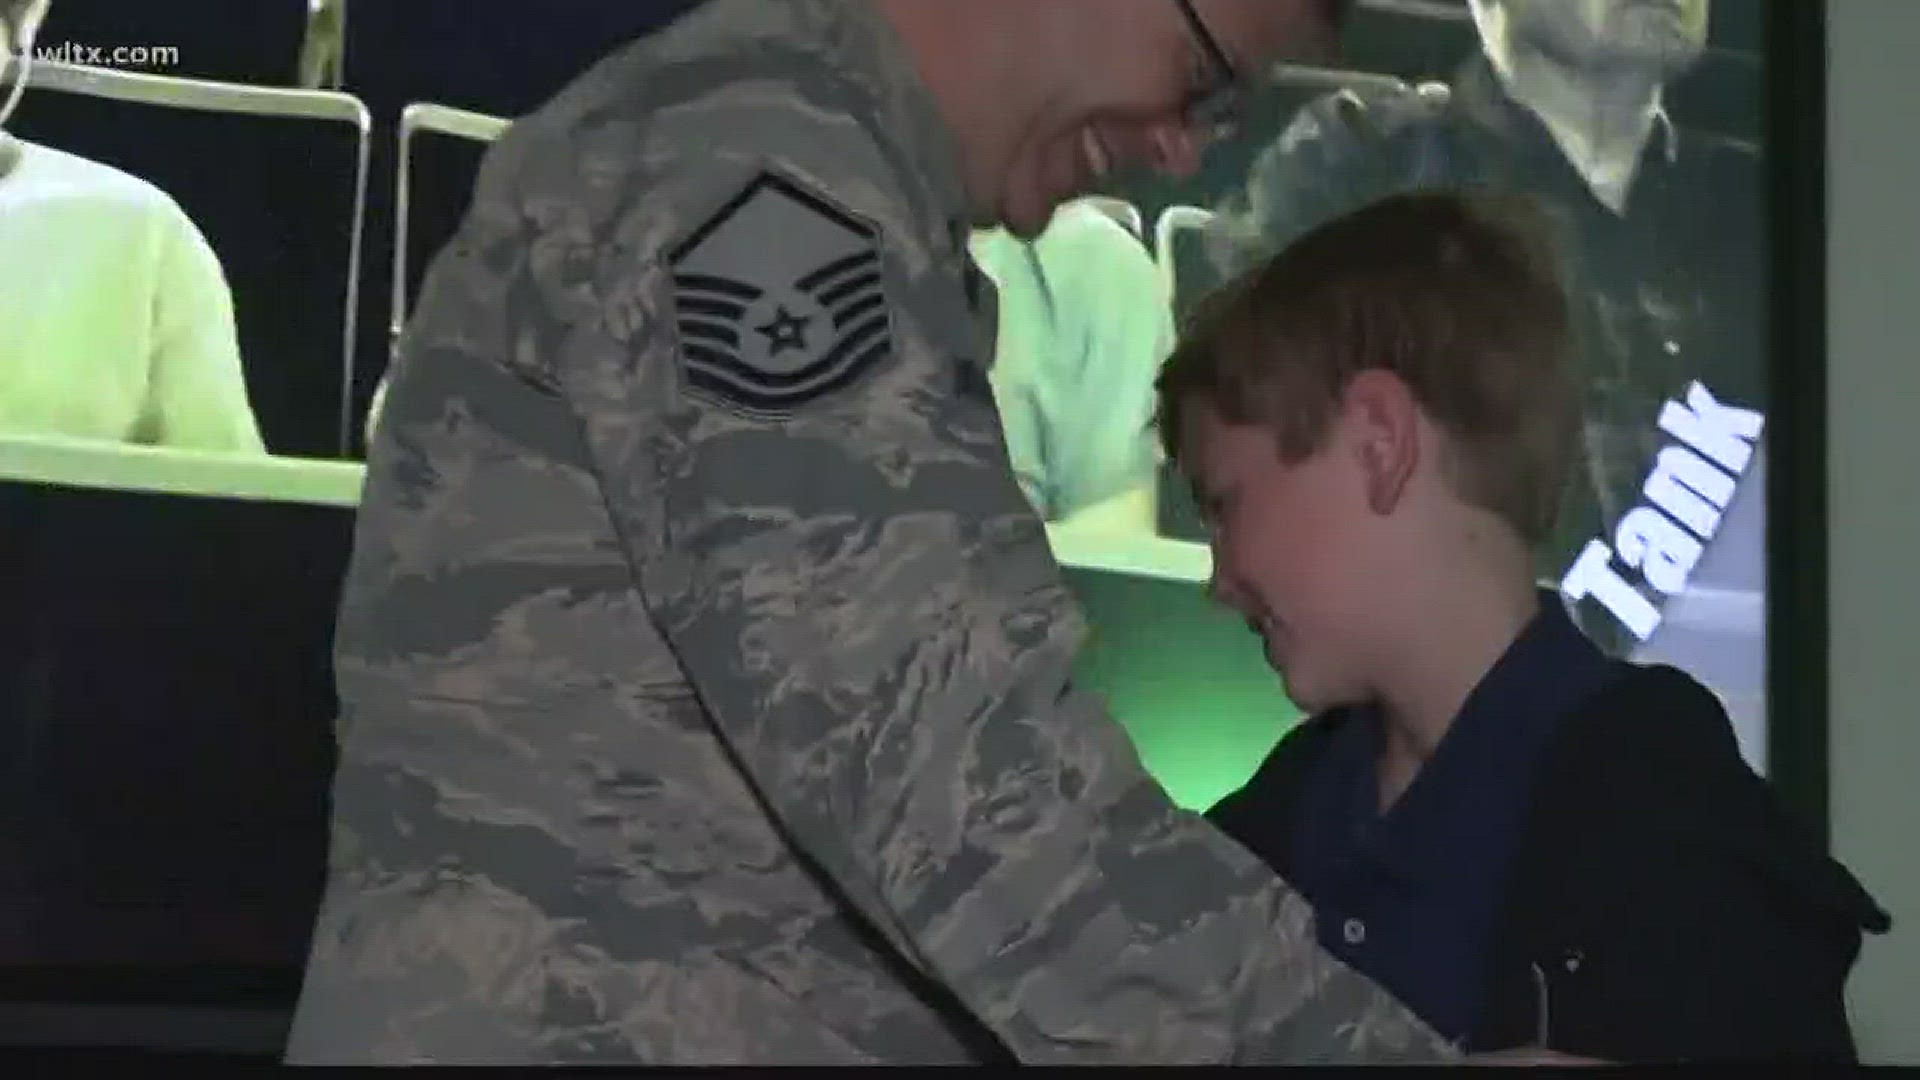 Master Sergeant Steven Zimmerman says his family means everything. He made his son's day very special.